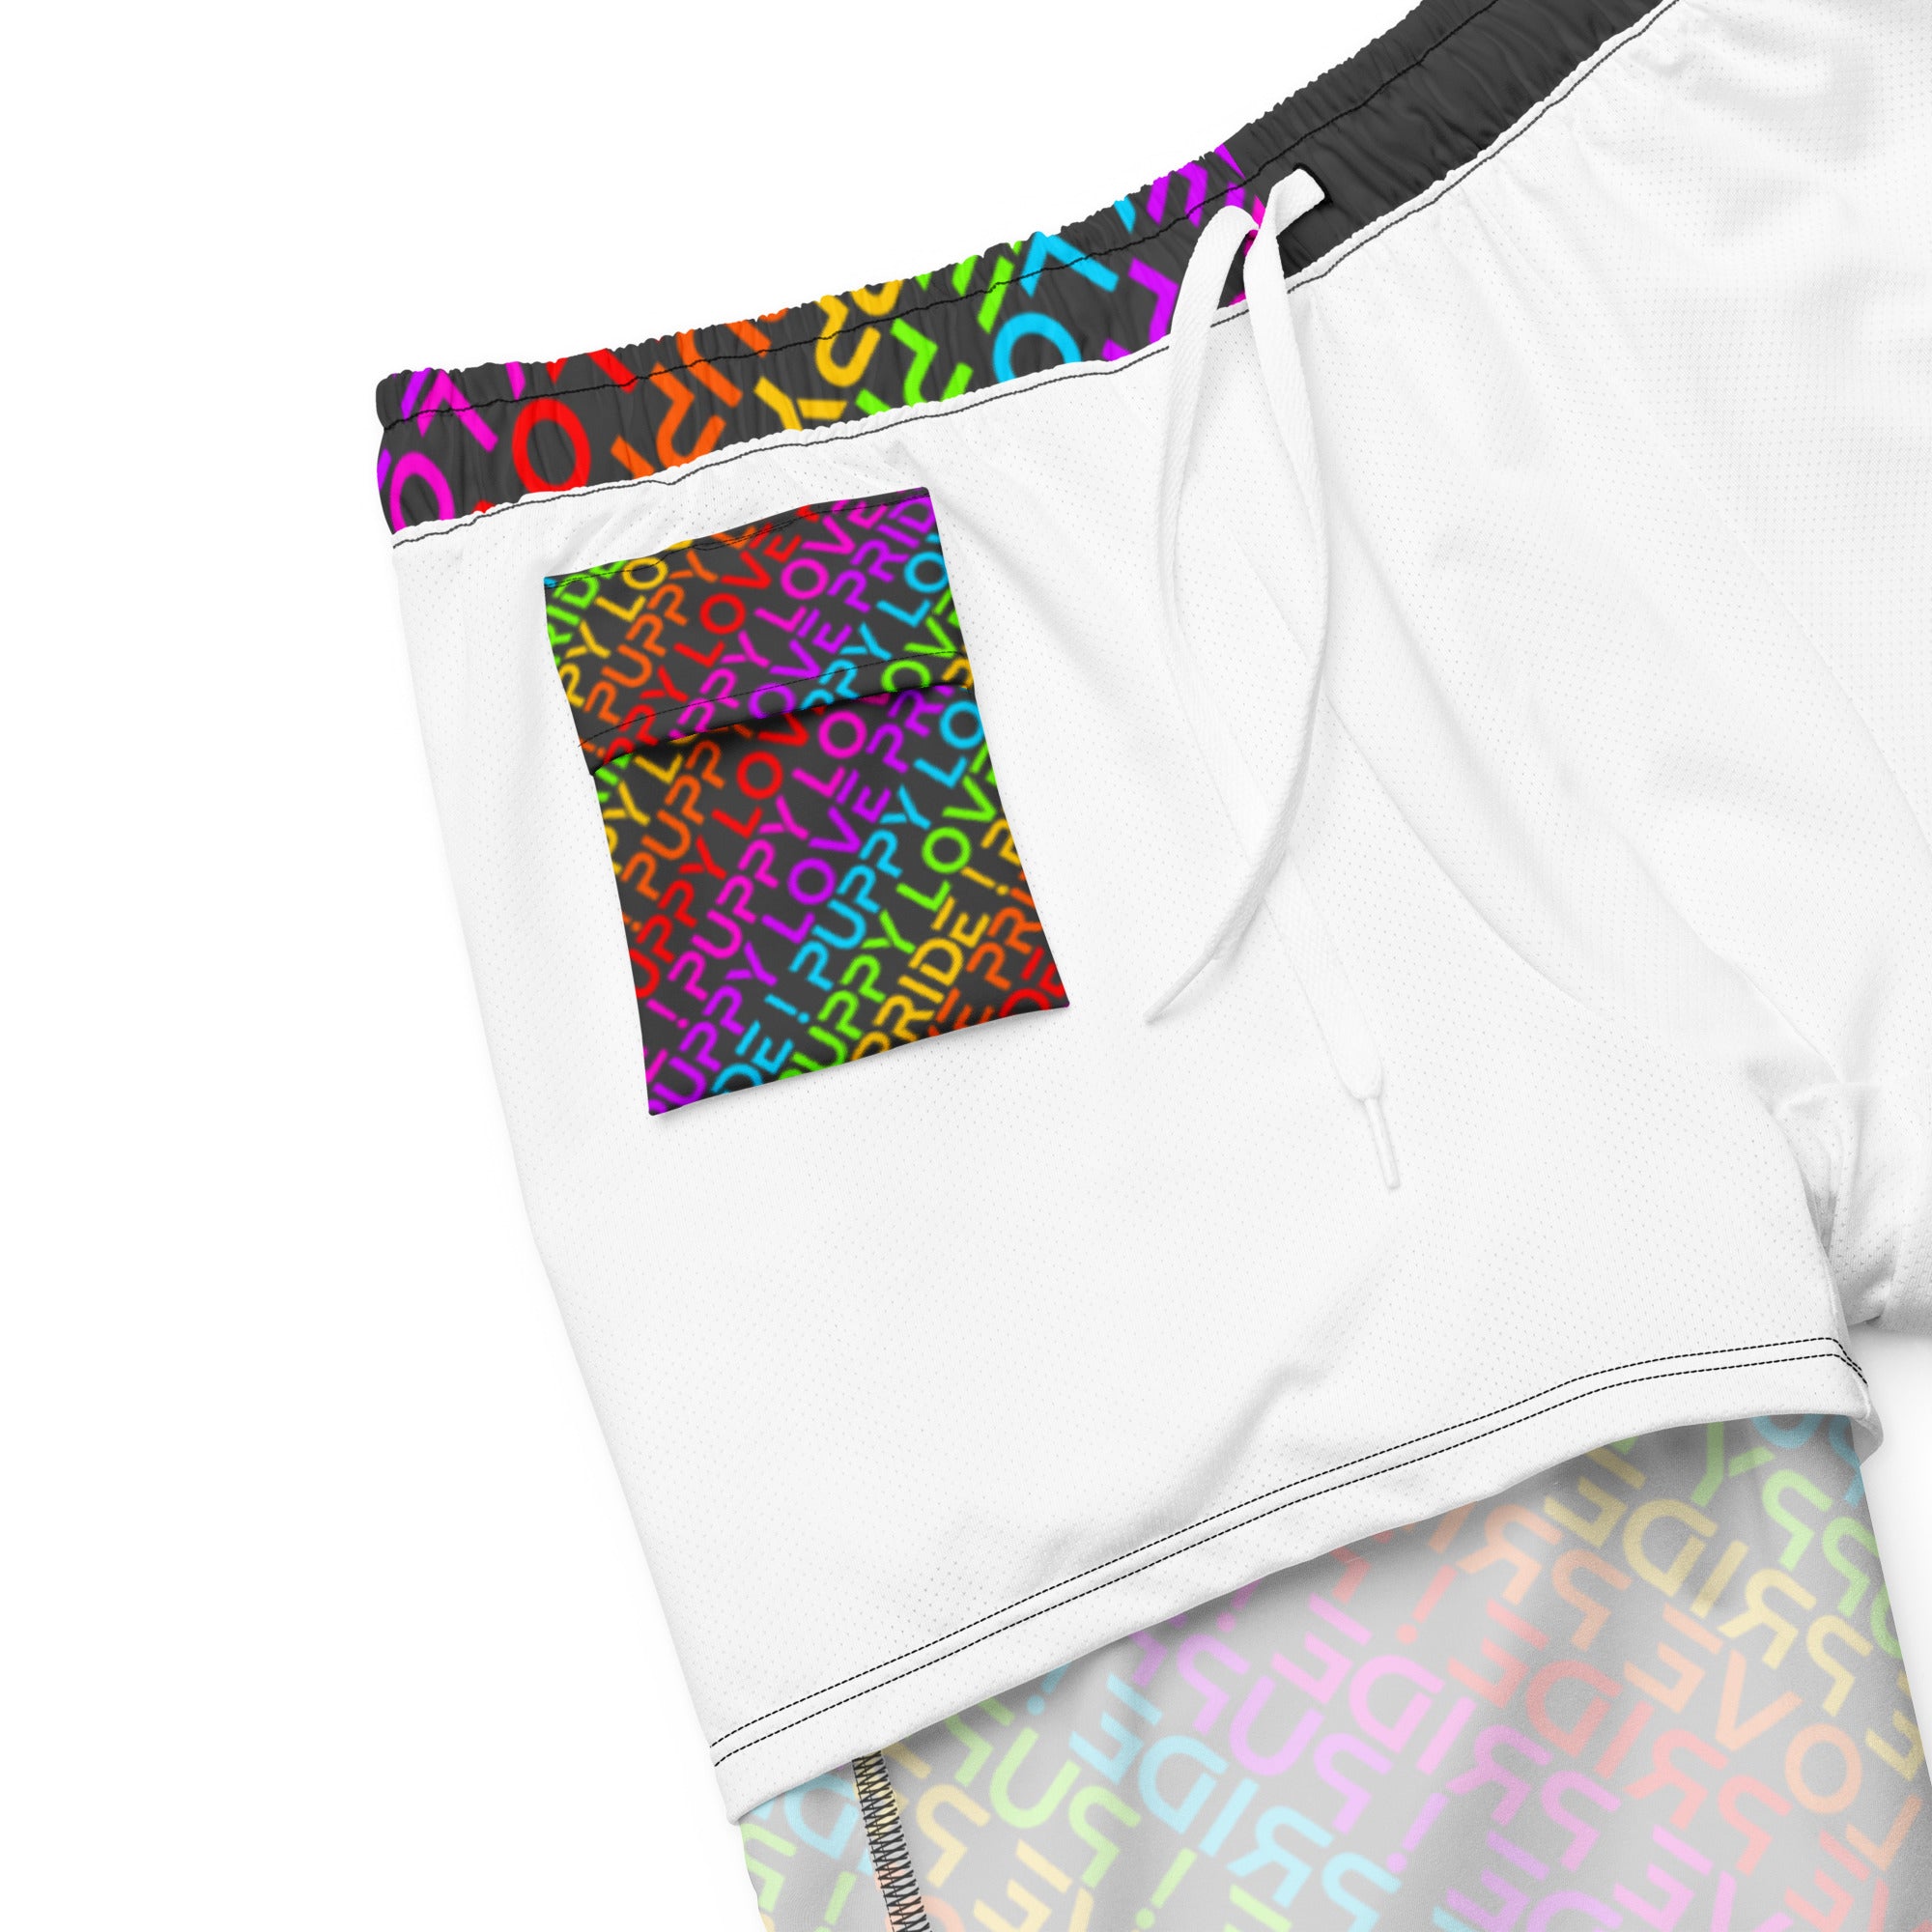 Puppy Love Pride / Swimming Trunks / Customize